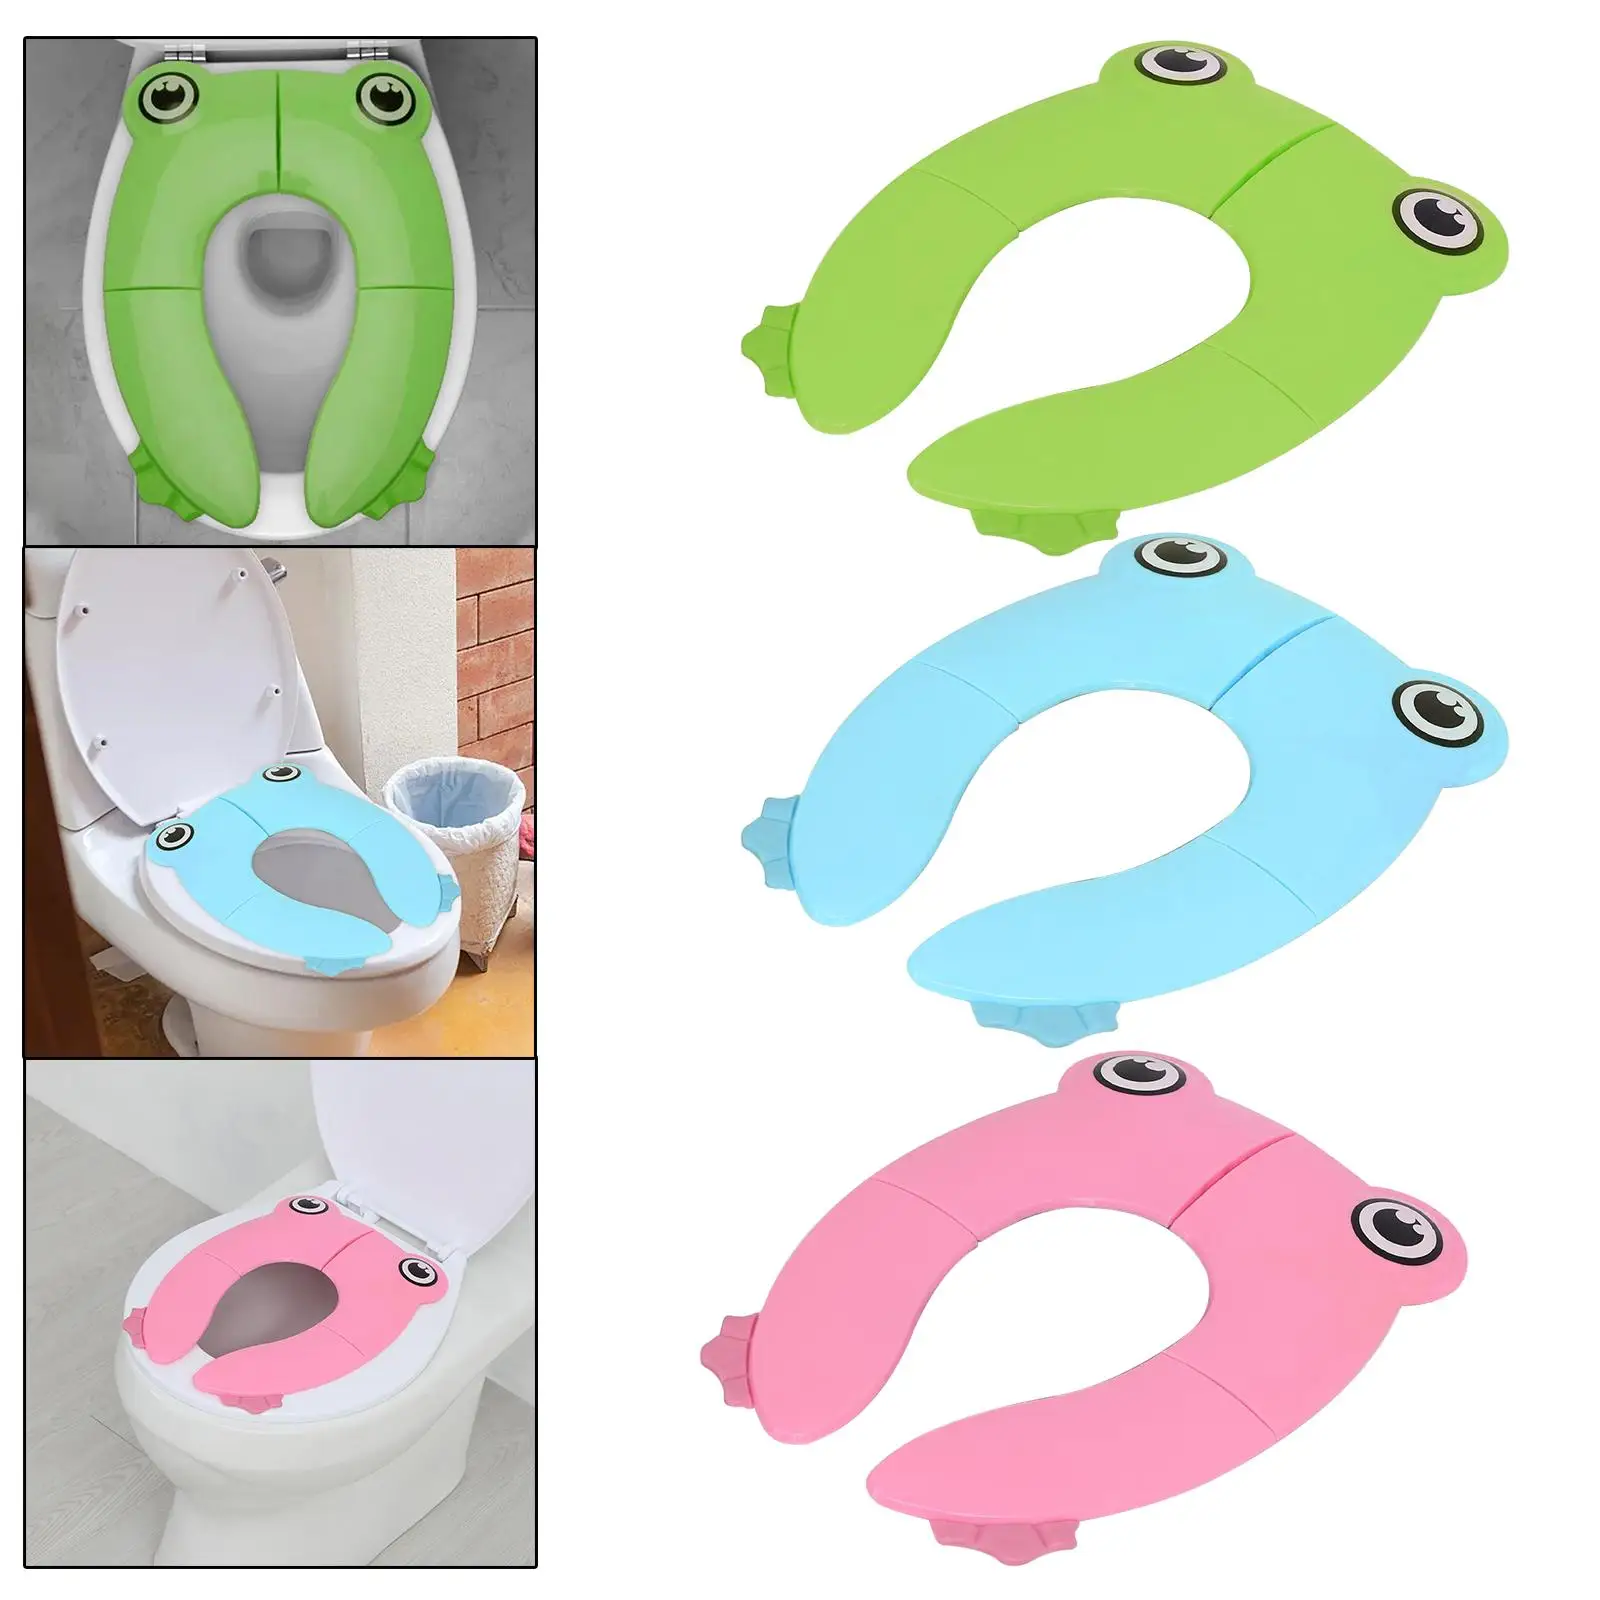 Toilet Seat Mat Oval Durable Reusable Foldable Portable Comfortable Potty Seat Pads for Camping Home Use Traveling Toddler Kids